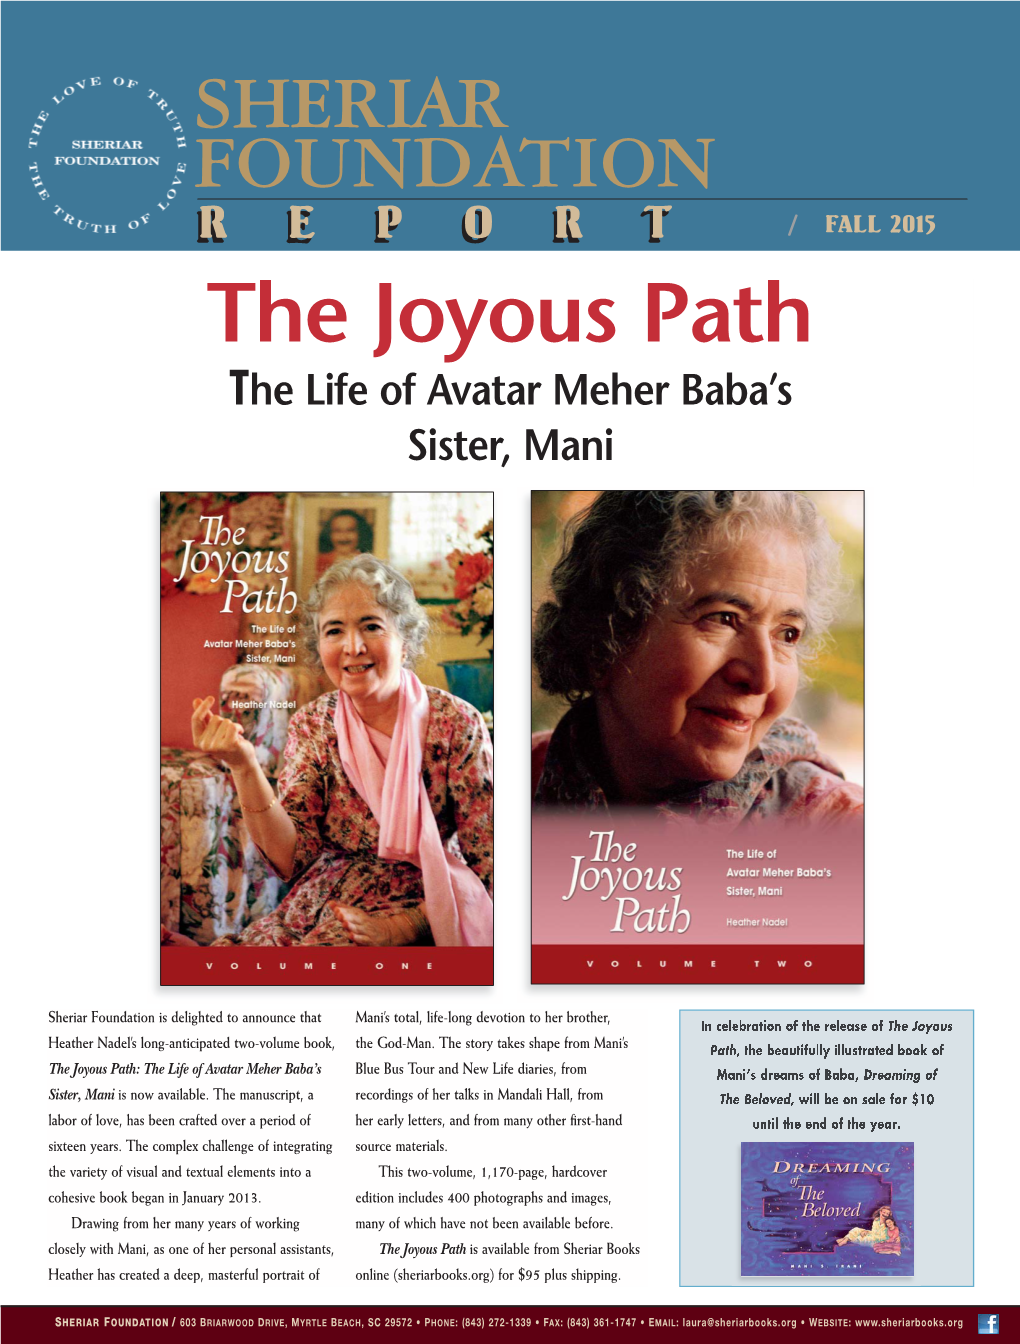 The Joyous Path the Life of Avatar Meher Baba’S Sister, Mani